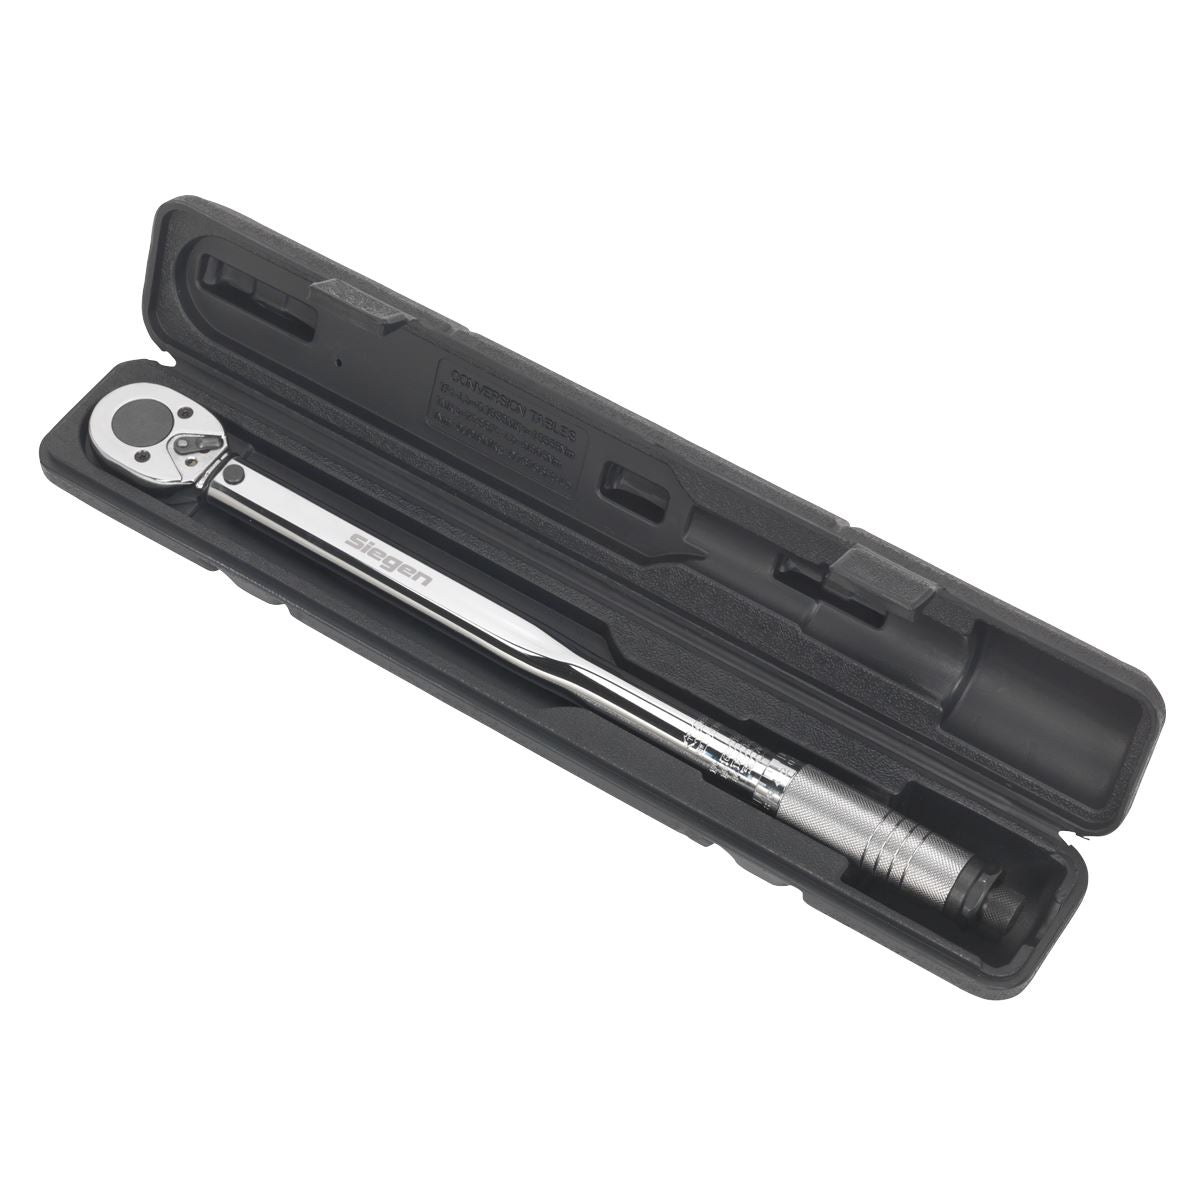 Siegen by Sealey Torque Wrench 1/2"Sq Drive